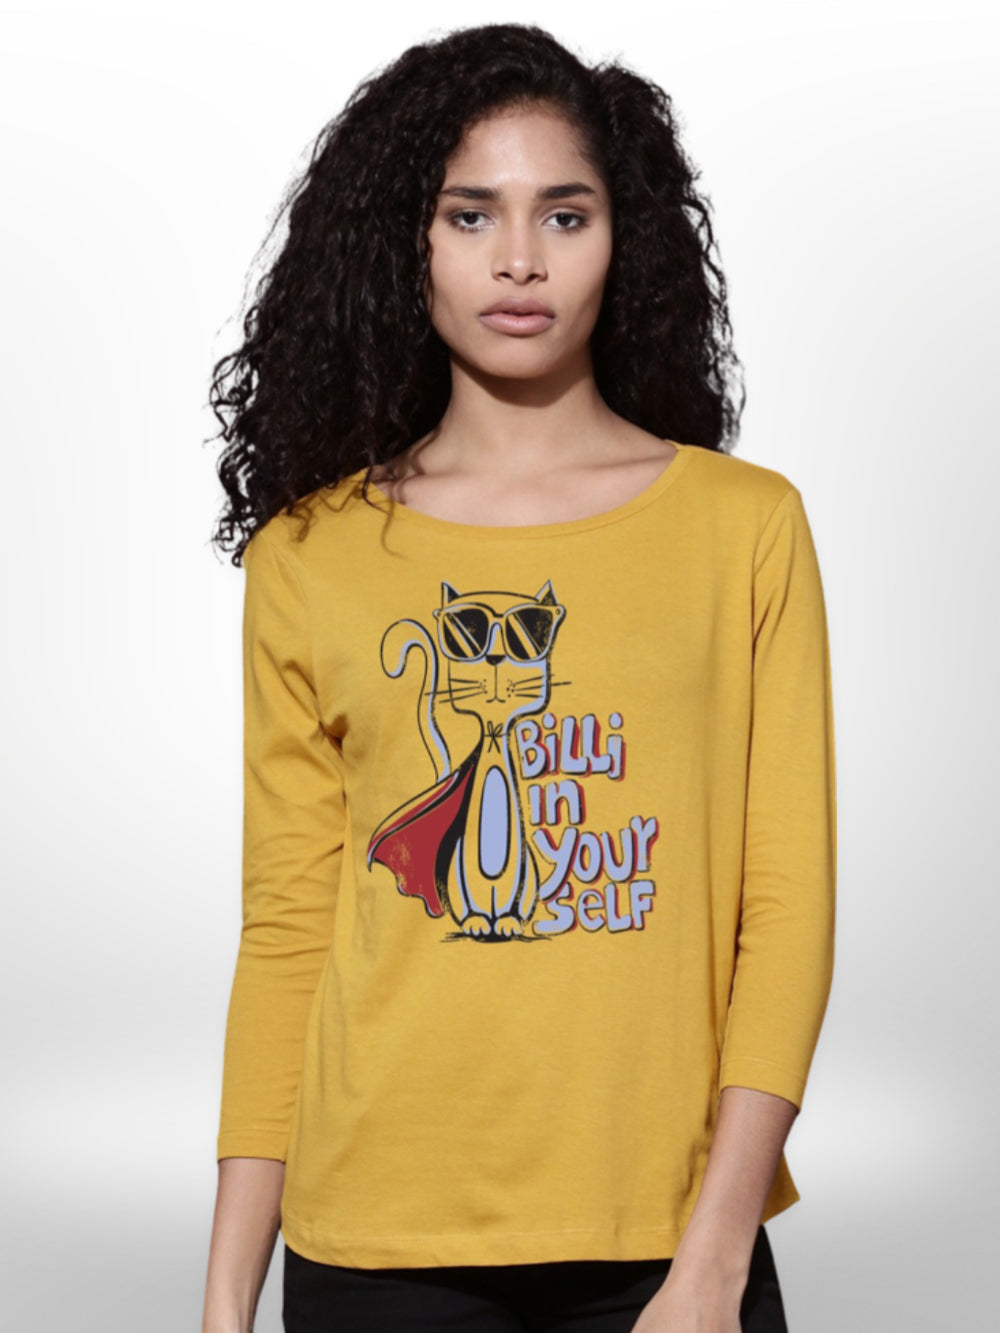 Billi Yourself Printed Ladies T-shirt Four Quarter Sleeve - Legacy Boutiques